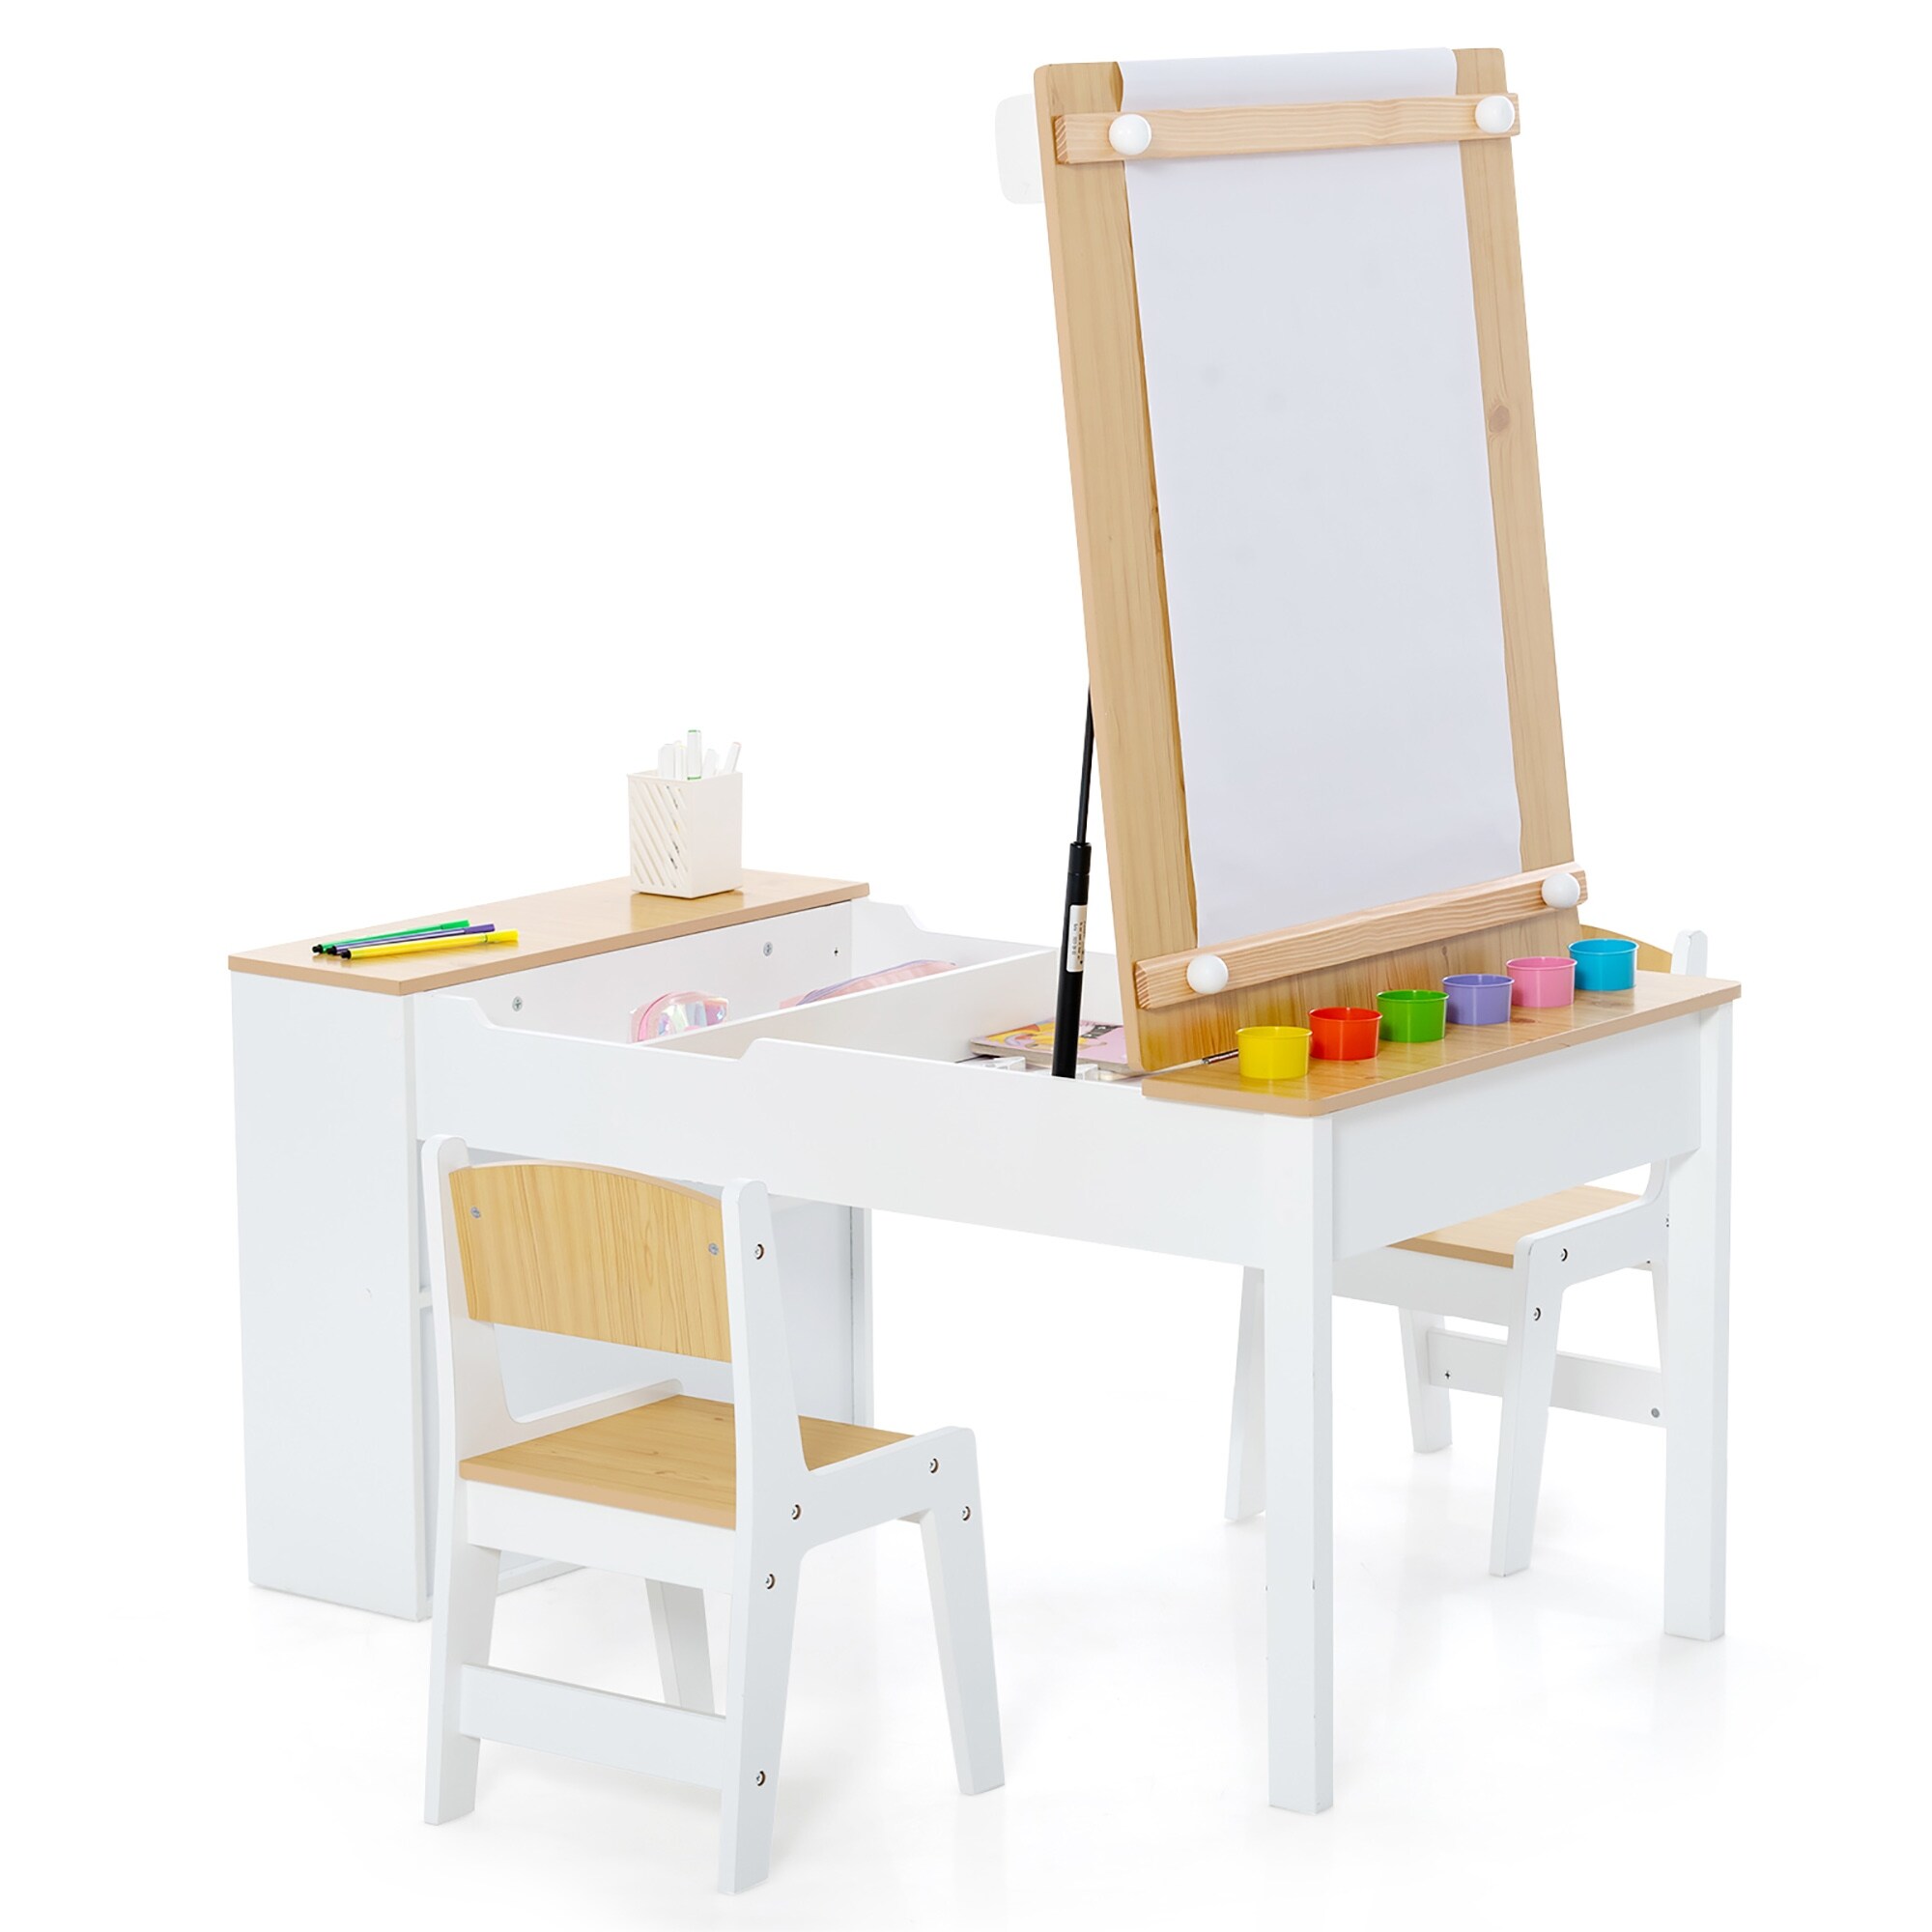 https://ak1.ostkcdn.com/images/products/is/images/direct/ac8d2348265ffec8f90ad5c365d44c525409971a/Gymax-2-in-1-Kids-Wooden-Art-Table-and-Art-Easel-Set-w--Chairs-Paper.jpg